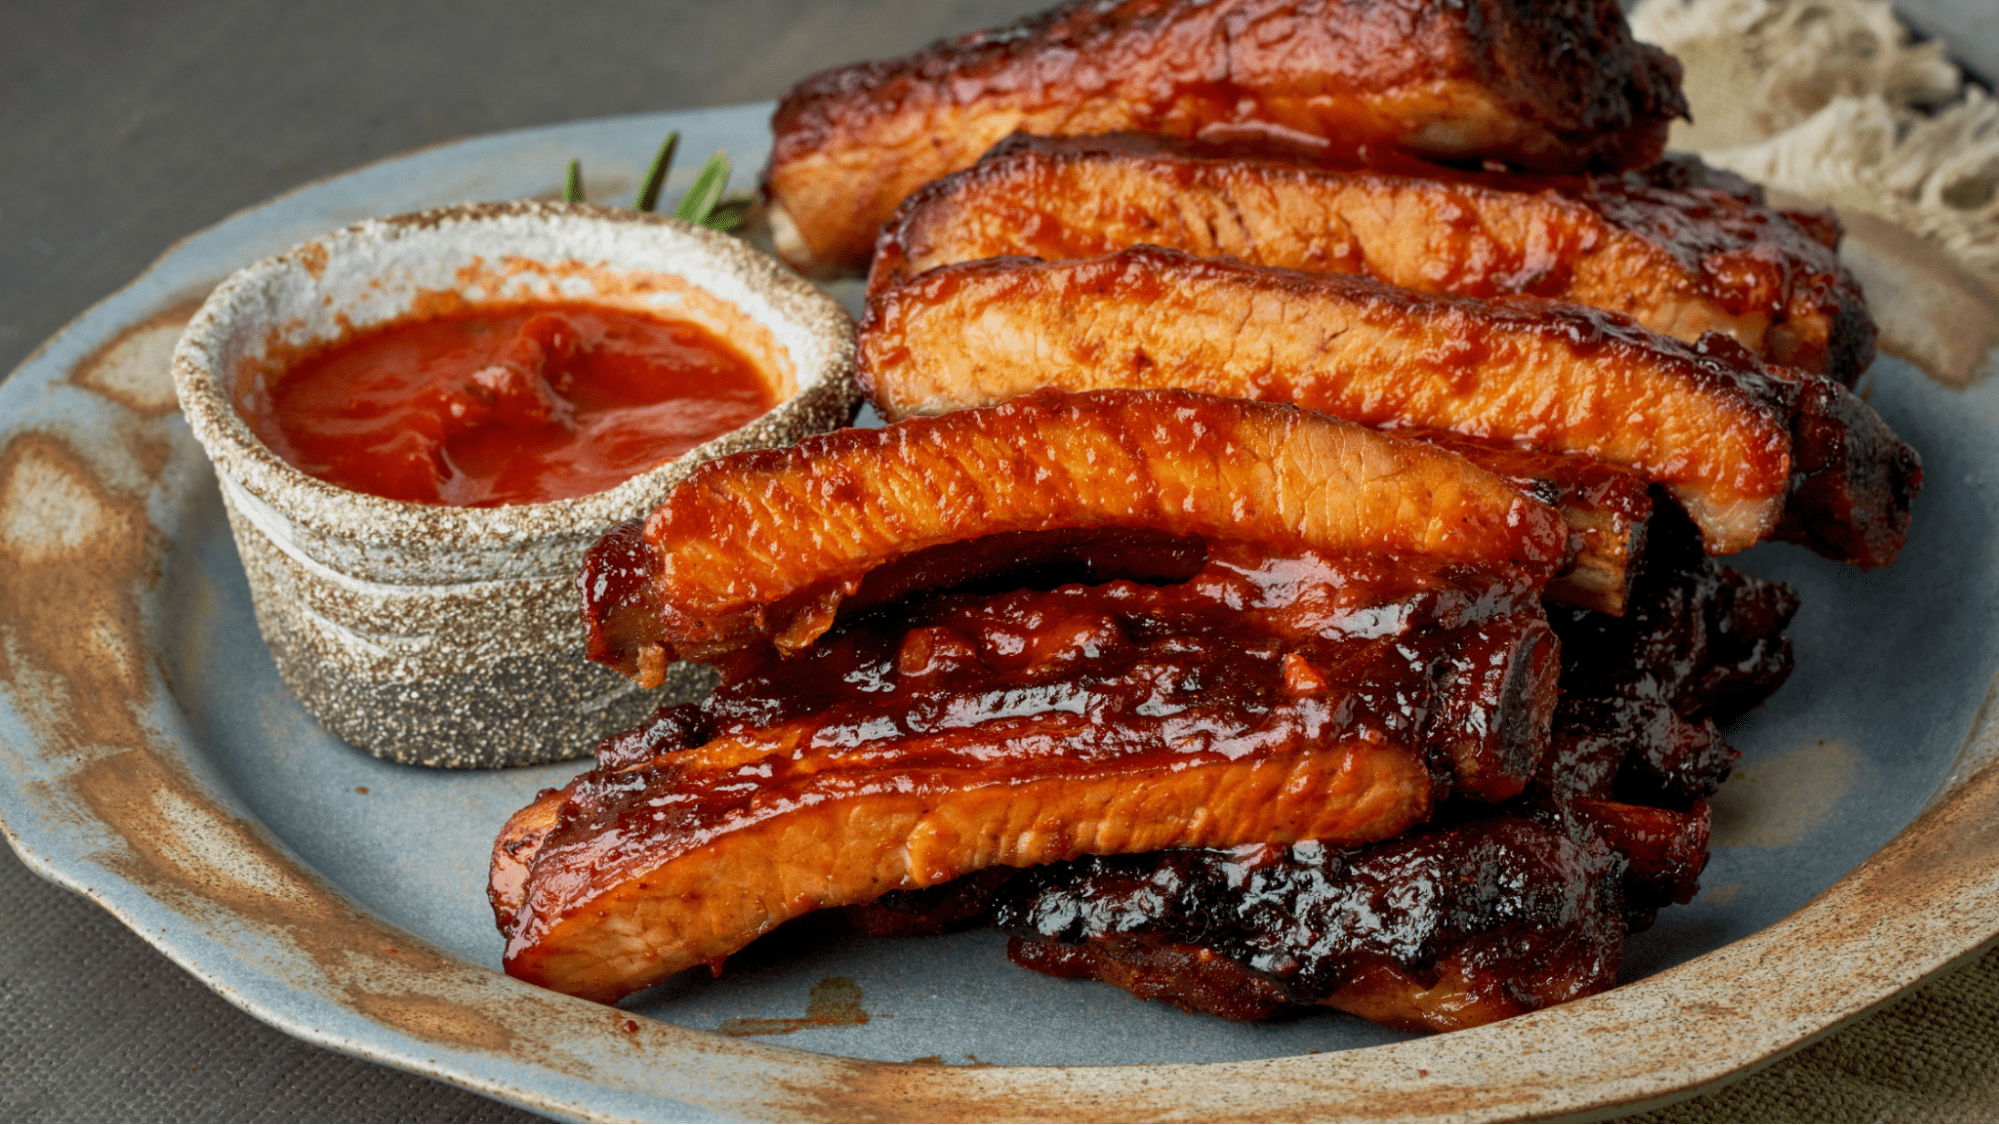 Plate of barbecue ribs